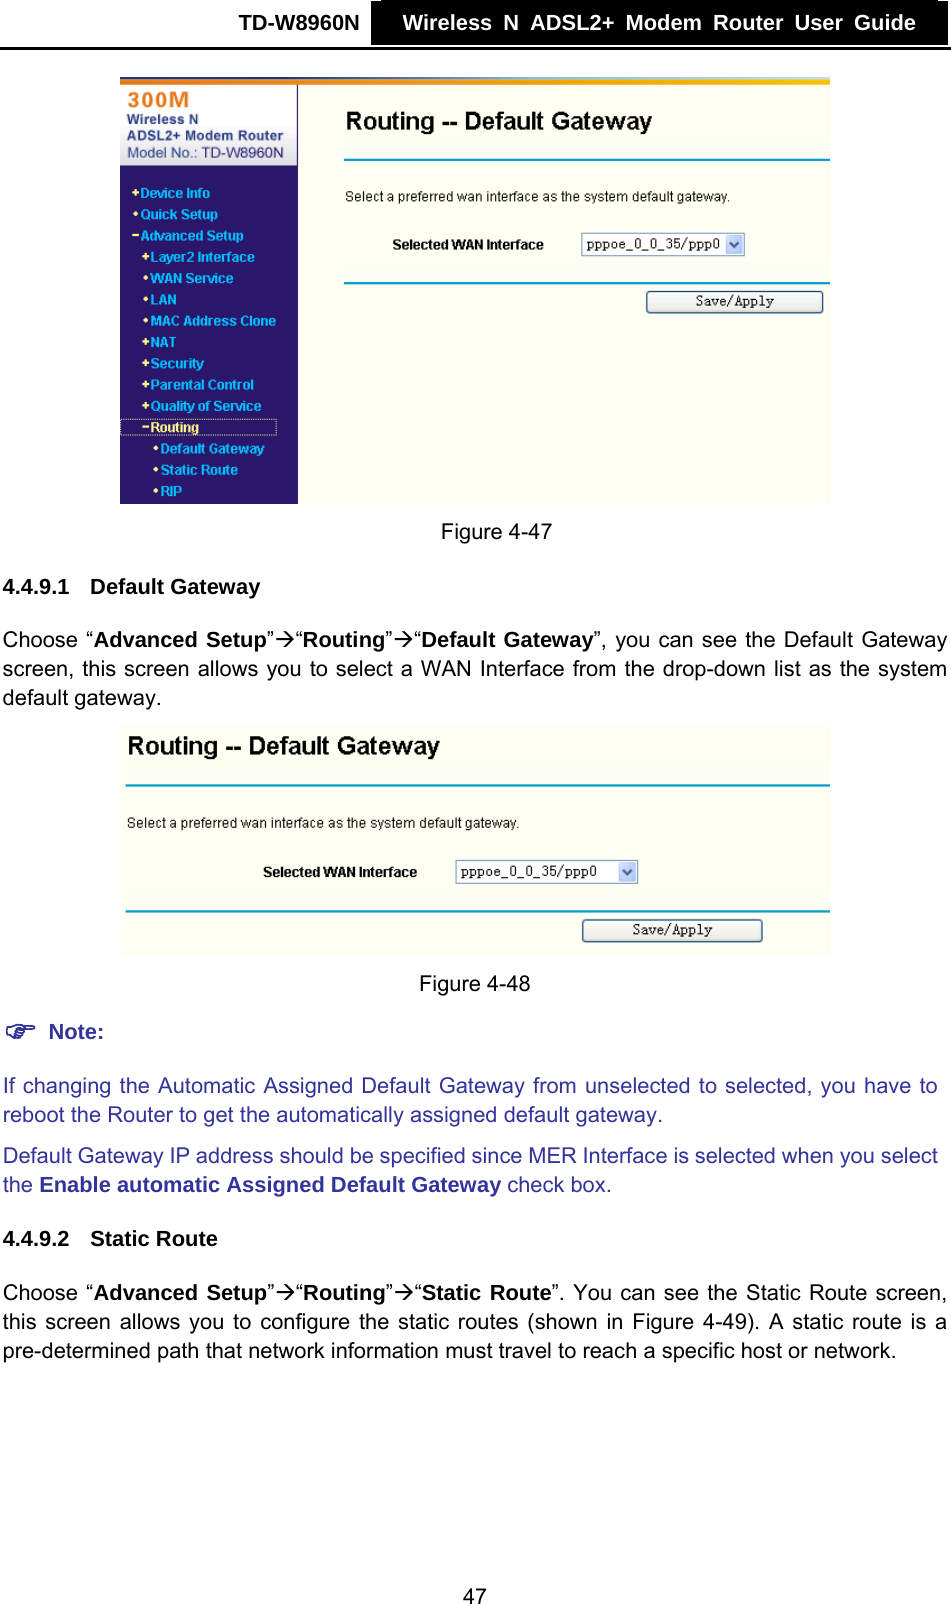 TD-W8960N    Wireless N ADSL2+ Modem Router User Guide      Figure 4-47 4.4.9.1  Default Gateway Choose “Advanced Setup”Æ“Routing”Æ“Default Gateway”, you can see the Default Gateway screen, this screen allows you to select a WAN Interface from the drop-down list as the system default gateway.  Figure 4-48 ) Note: If changing the Automatic Assigned Default Gateway from unselected to selected, you have to reboot the Router to get the automatically assigned default gateway. Default Gateway IP address should be specified since MER Interface is selected when you select the Enable automatic Assigned Default Gateway check box. 4.4.9.2  Static Route Choose “Advanced Setup”Æ“Routing”Æ“Static Route”. You can see the Static Route screen, this screen allows you to configure the static routes (shown in Figure 4-49). A static route is a pre-determined path that network information must travel to reach a specific host or network. 47 